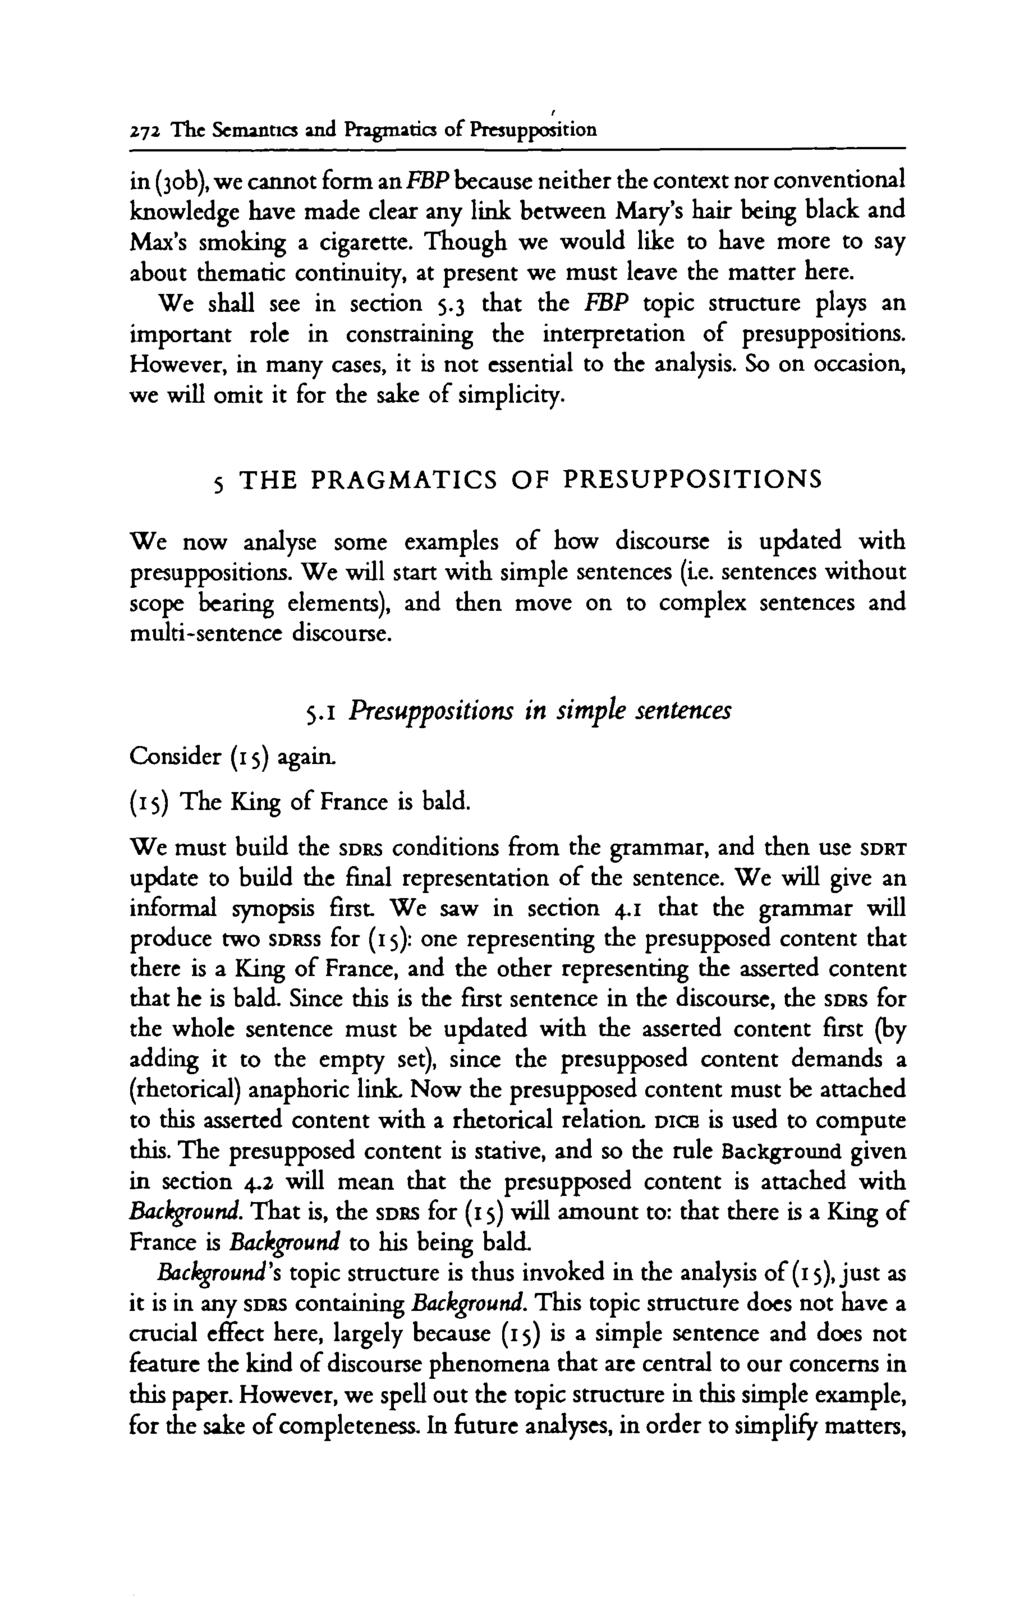 272 The Semantics and Pragmatics of Presupposition in (30b), we cannot form an FBP because neither the context nor conventional knowledge have made clear any link between Mary's hair being black and